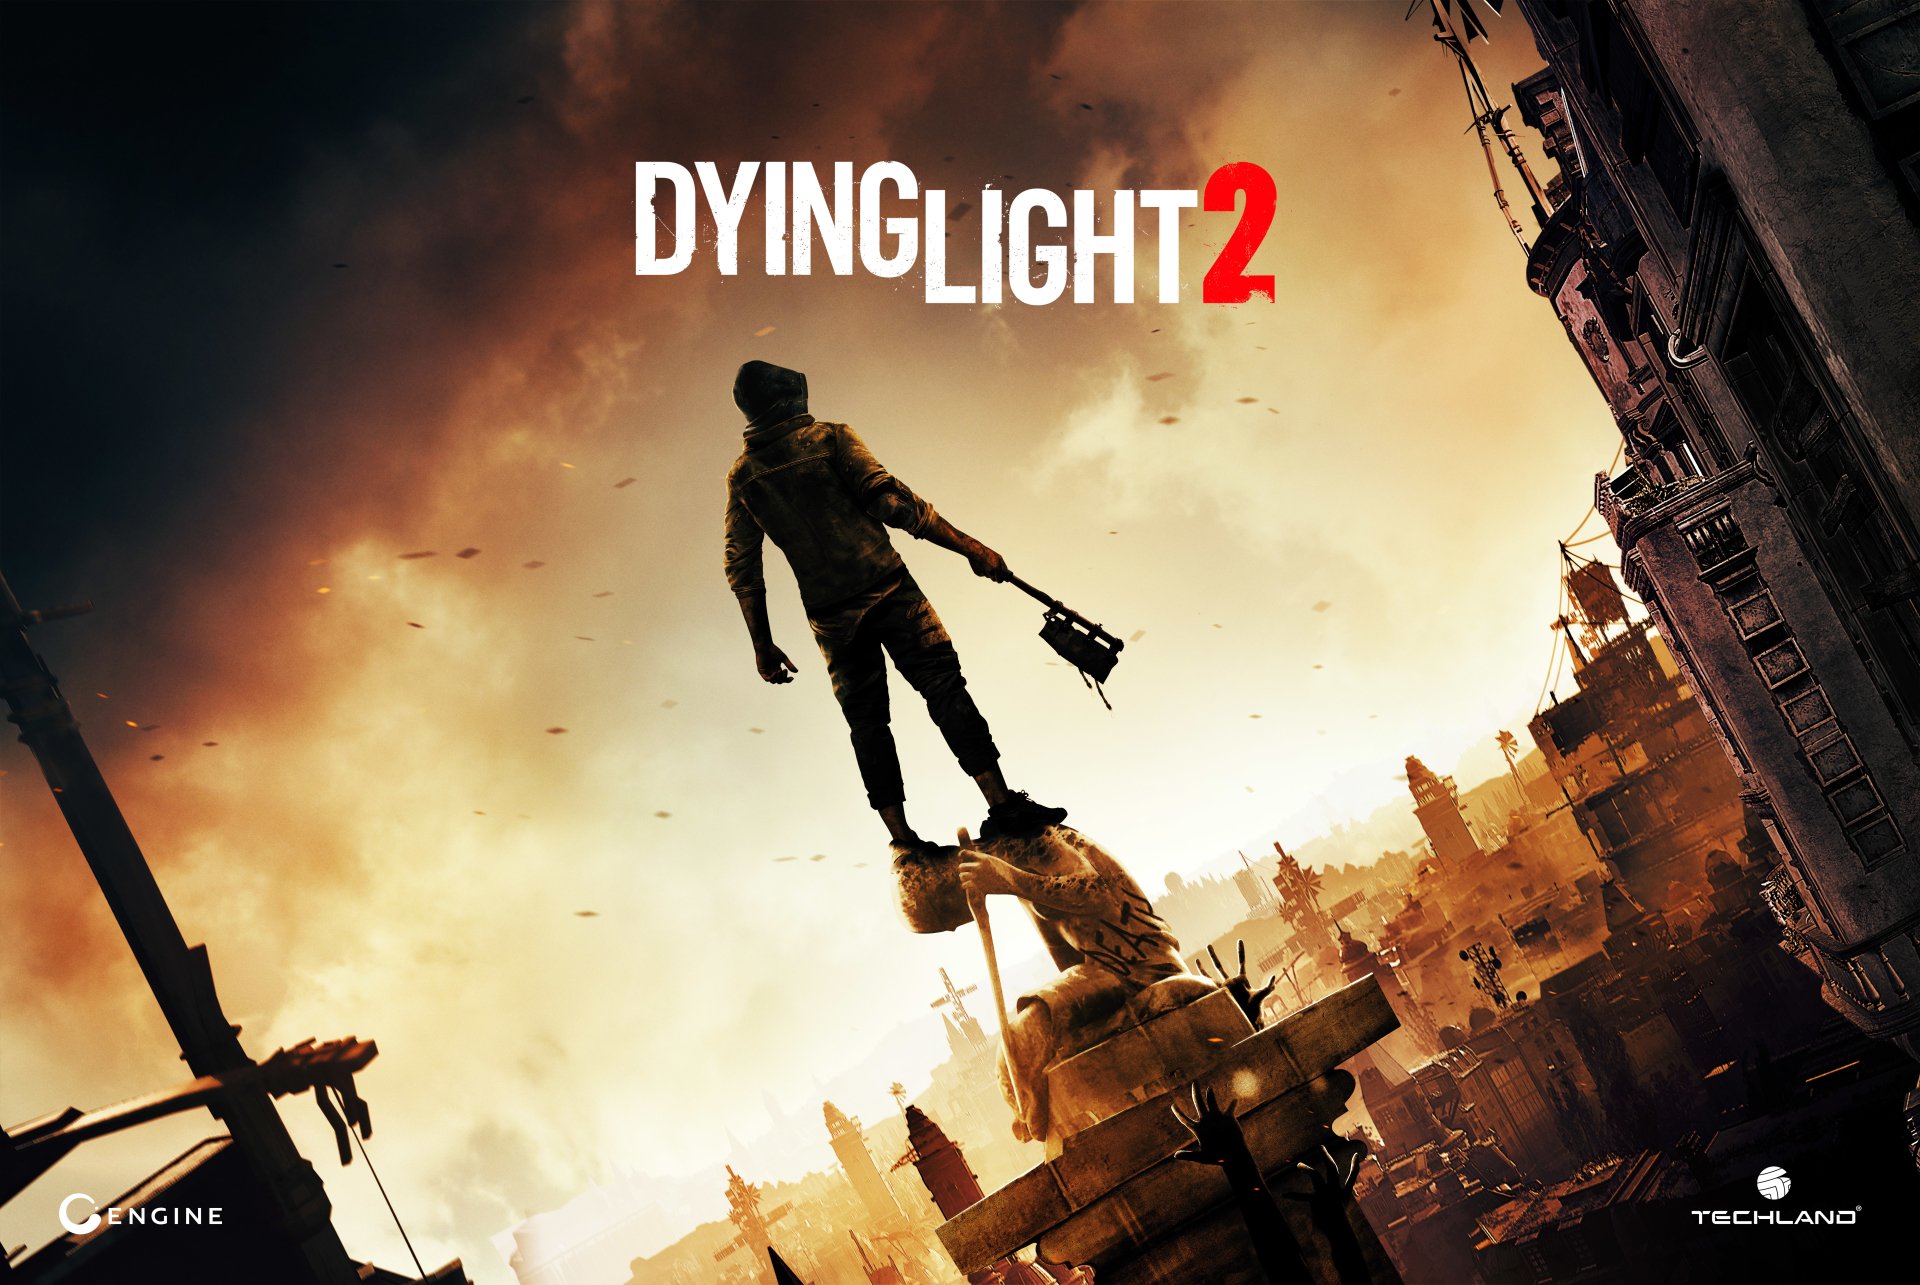 Dying light stay human hd papers and backgrounds